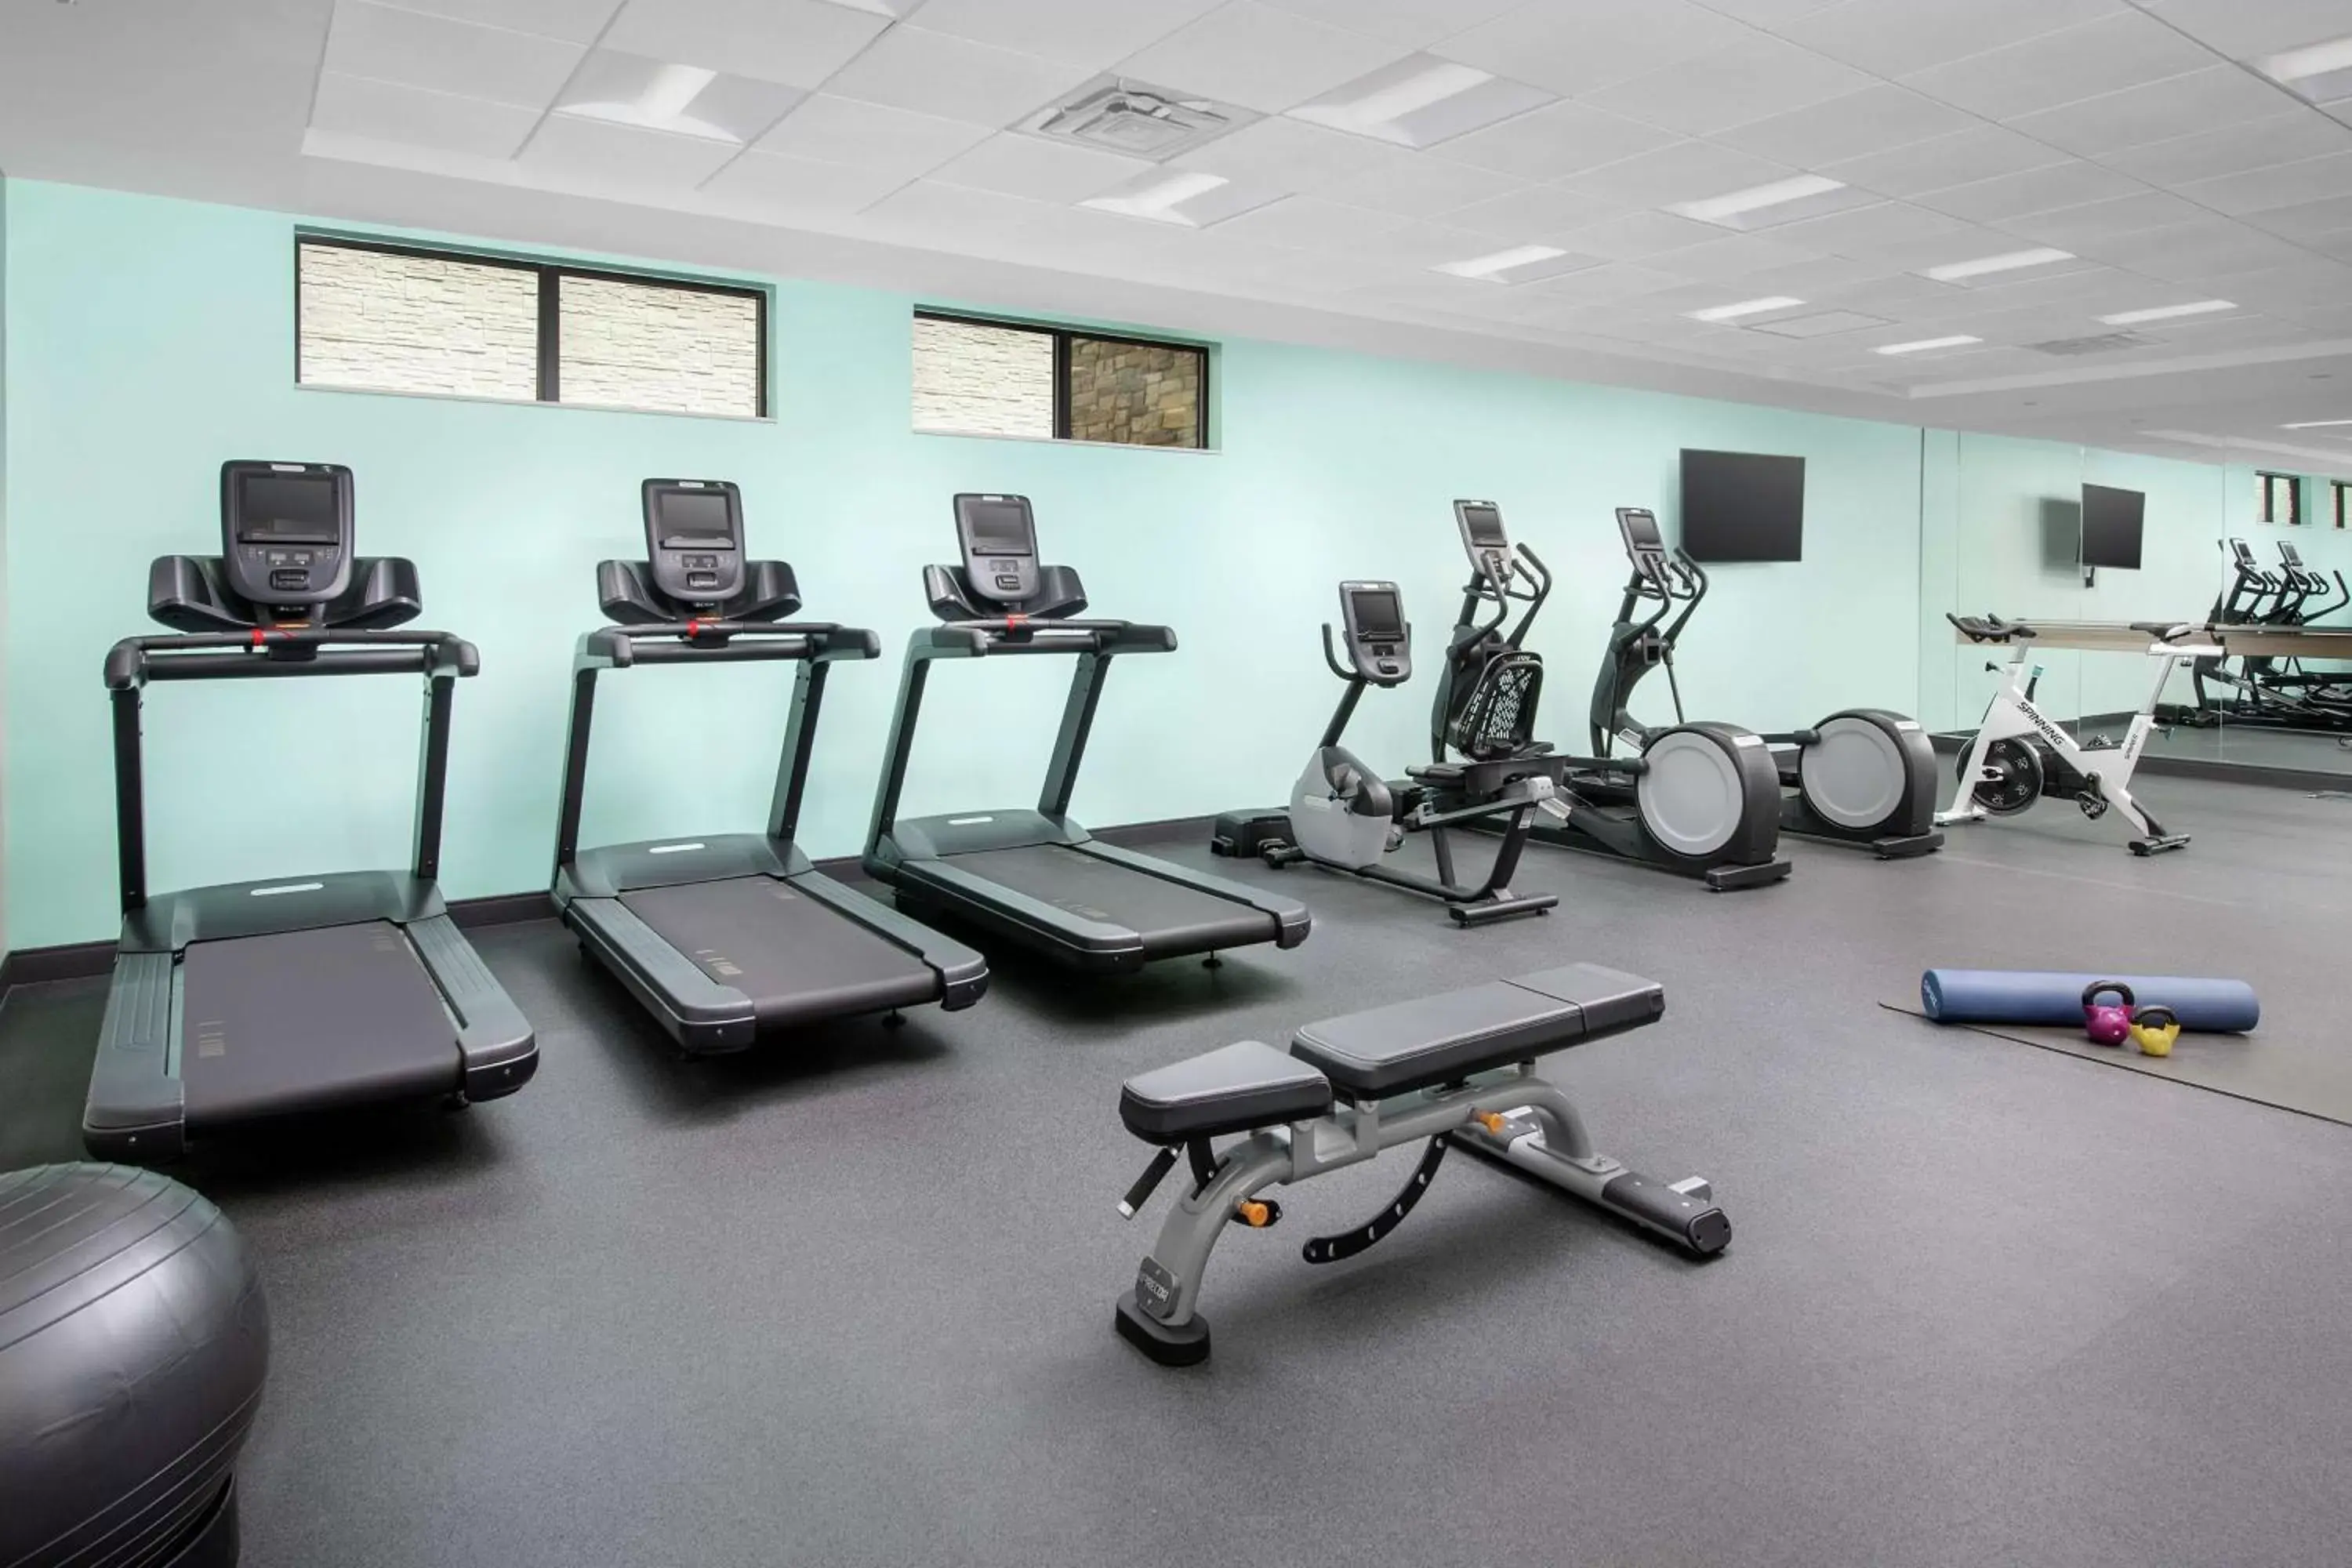 Fitness centre/facilities, Fitness Center/Facilities in Tru By Hilton Denver Airport Tower Road